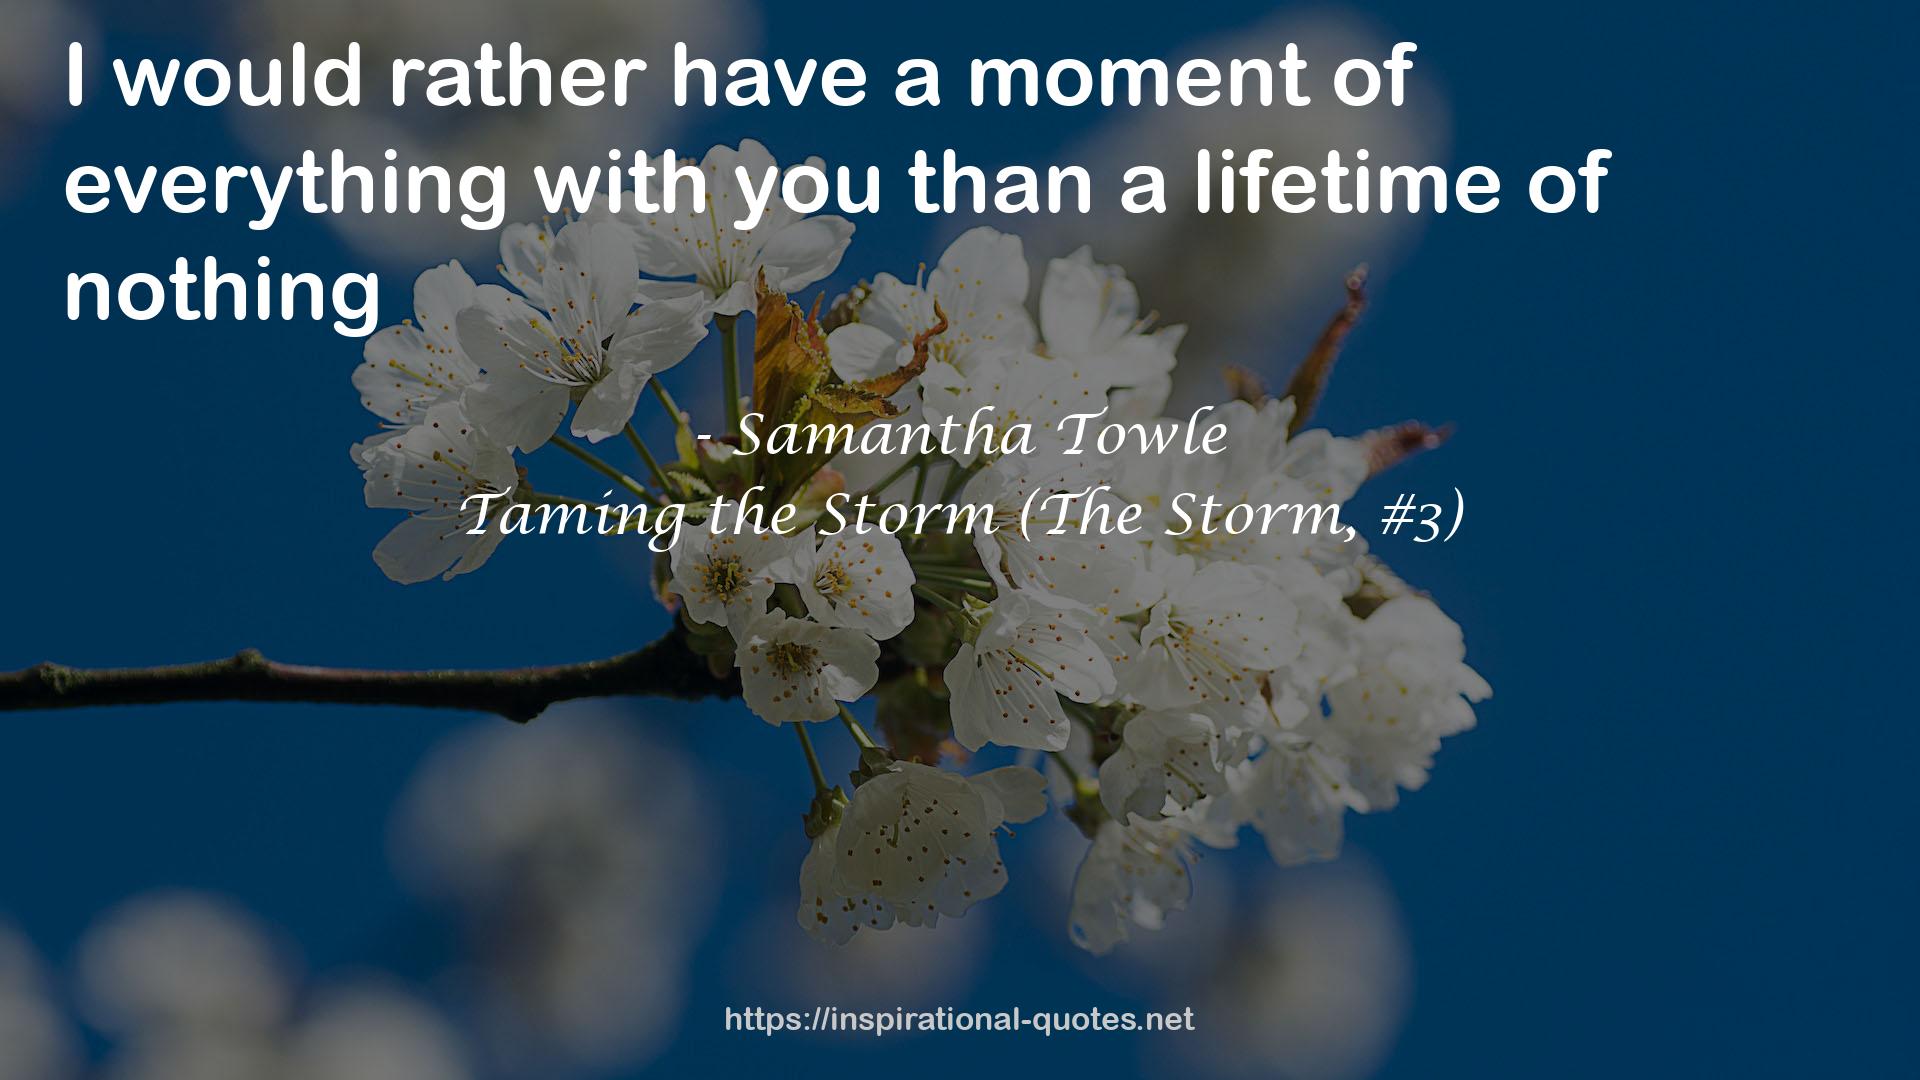 Taming the Storm (The Storm, #3) QUOTES